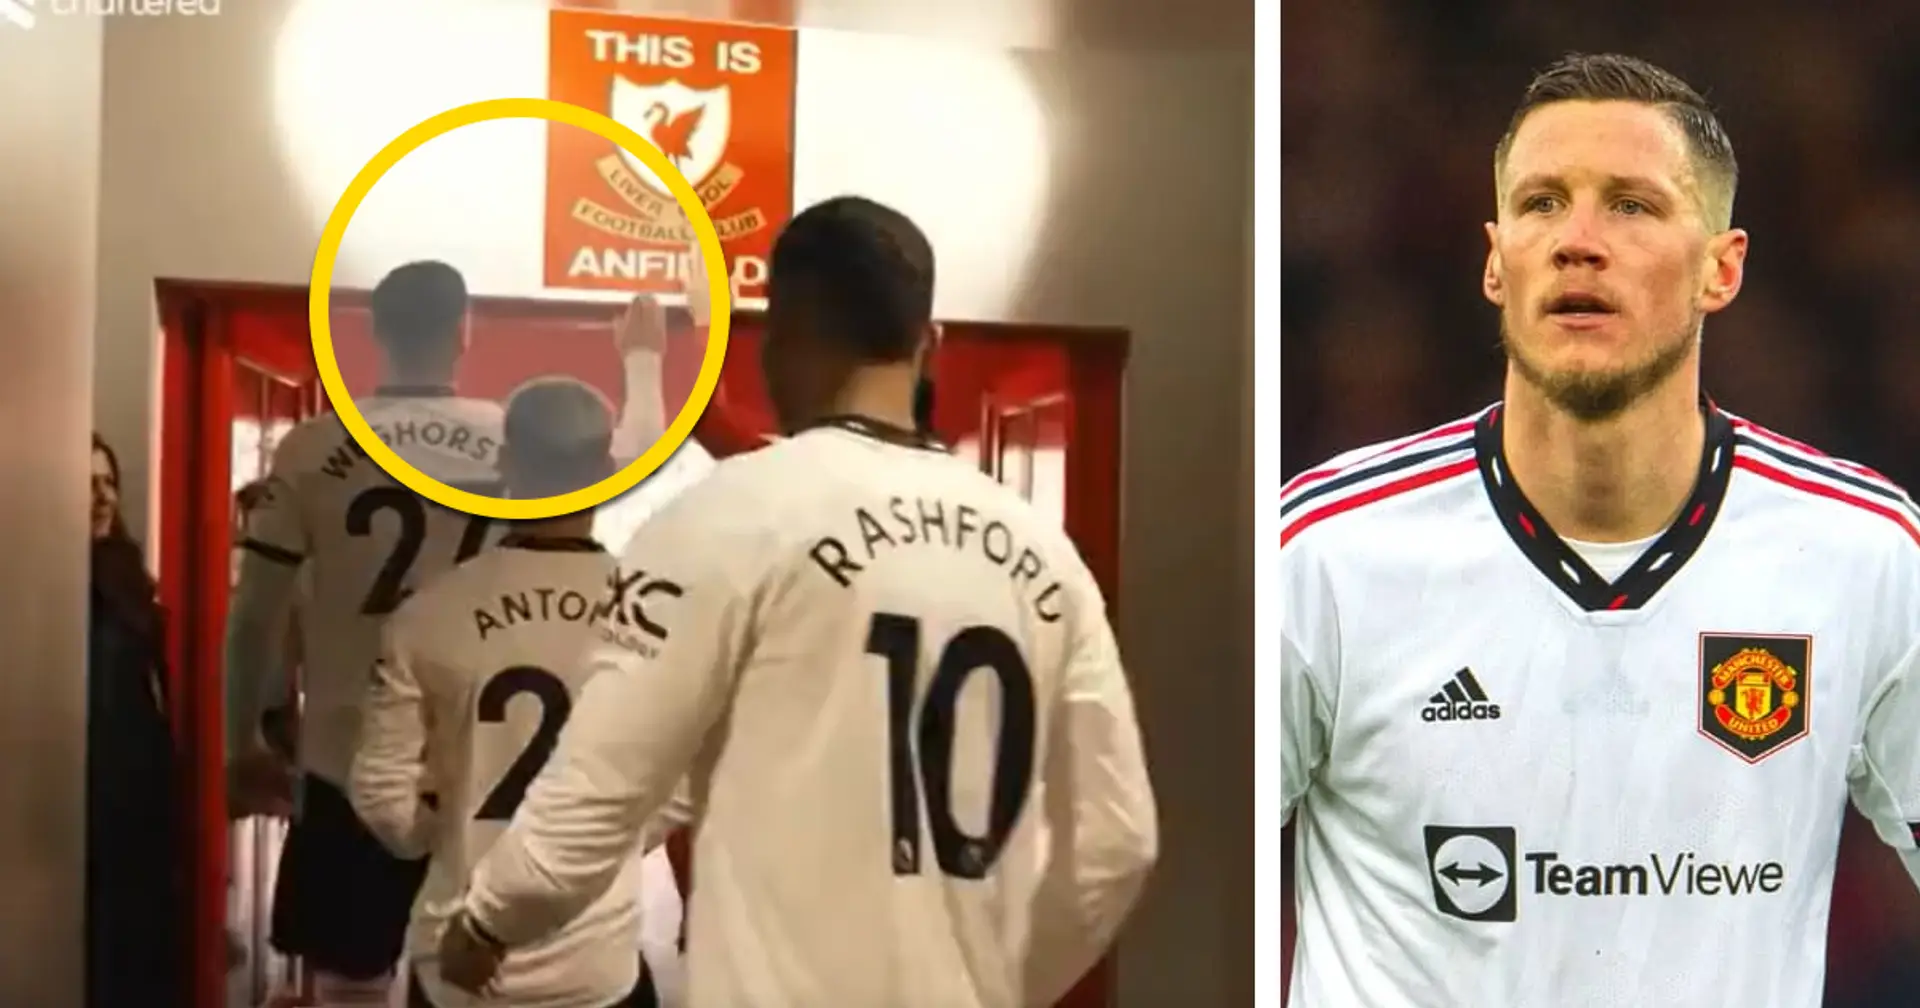 Weghorst has to explain himself after touching 'This Is Anfield' sign - not because he was Liverpool fan